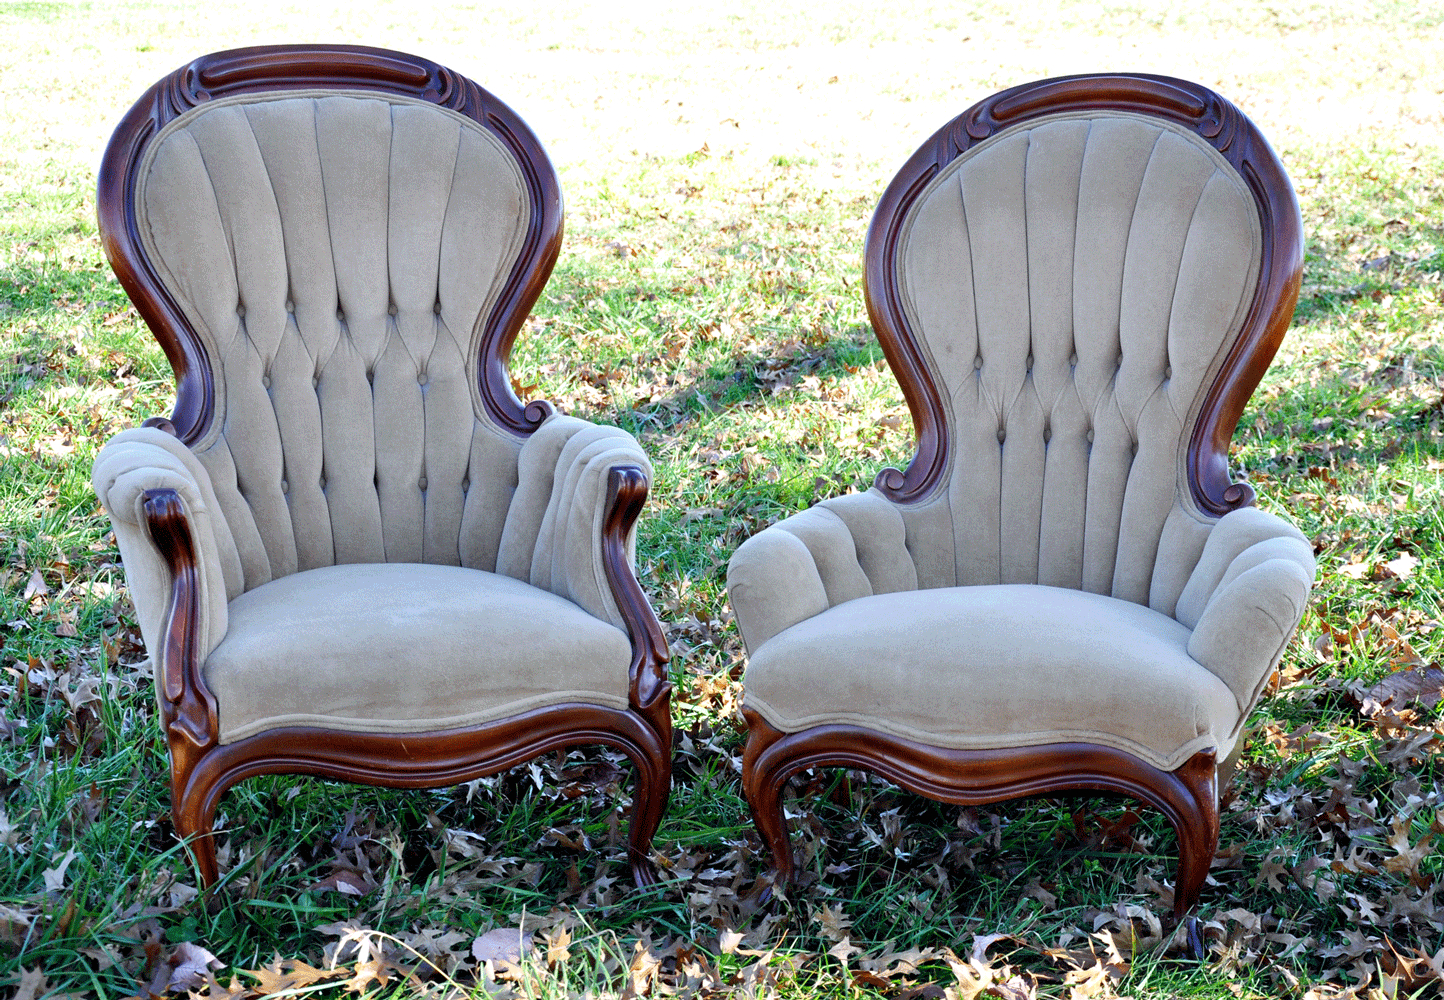 Details about   Antique Victorian Parlor His And Hers Chairs 